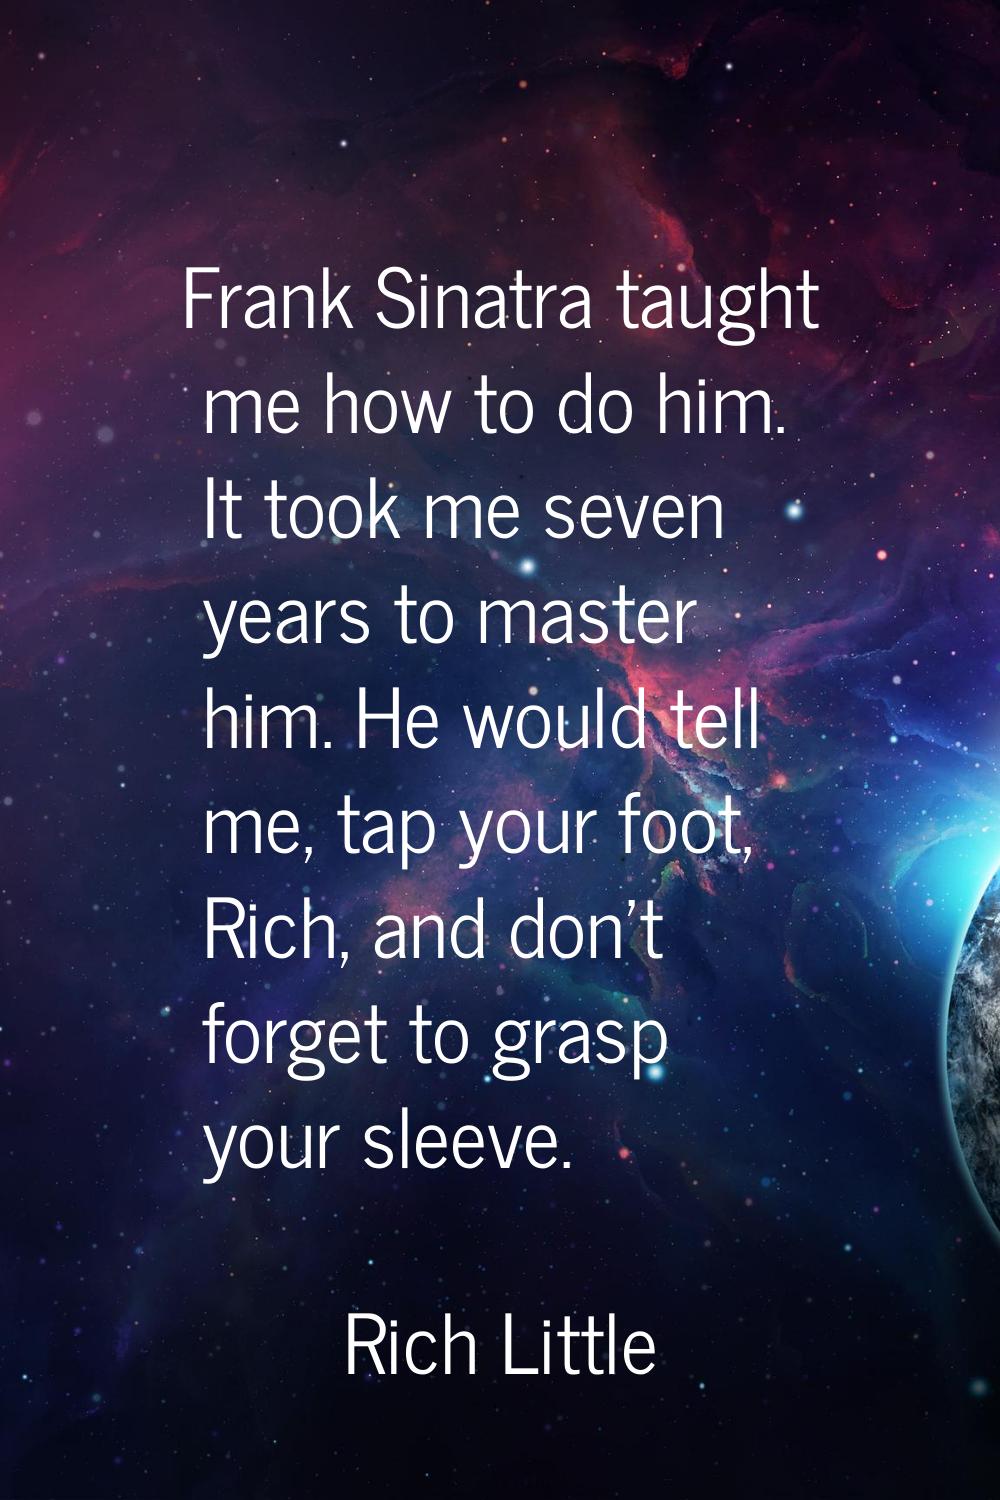 Frank Sinatra taught me how to do him. It took me seven years to master him. He would tell me, tap 